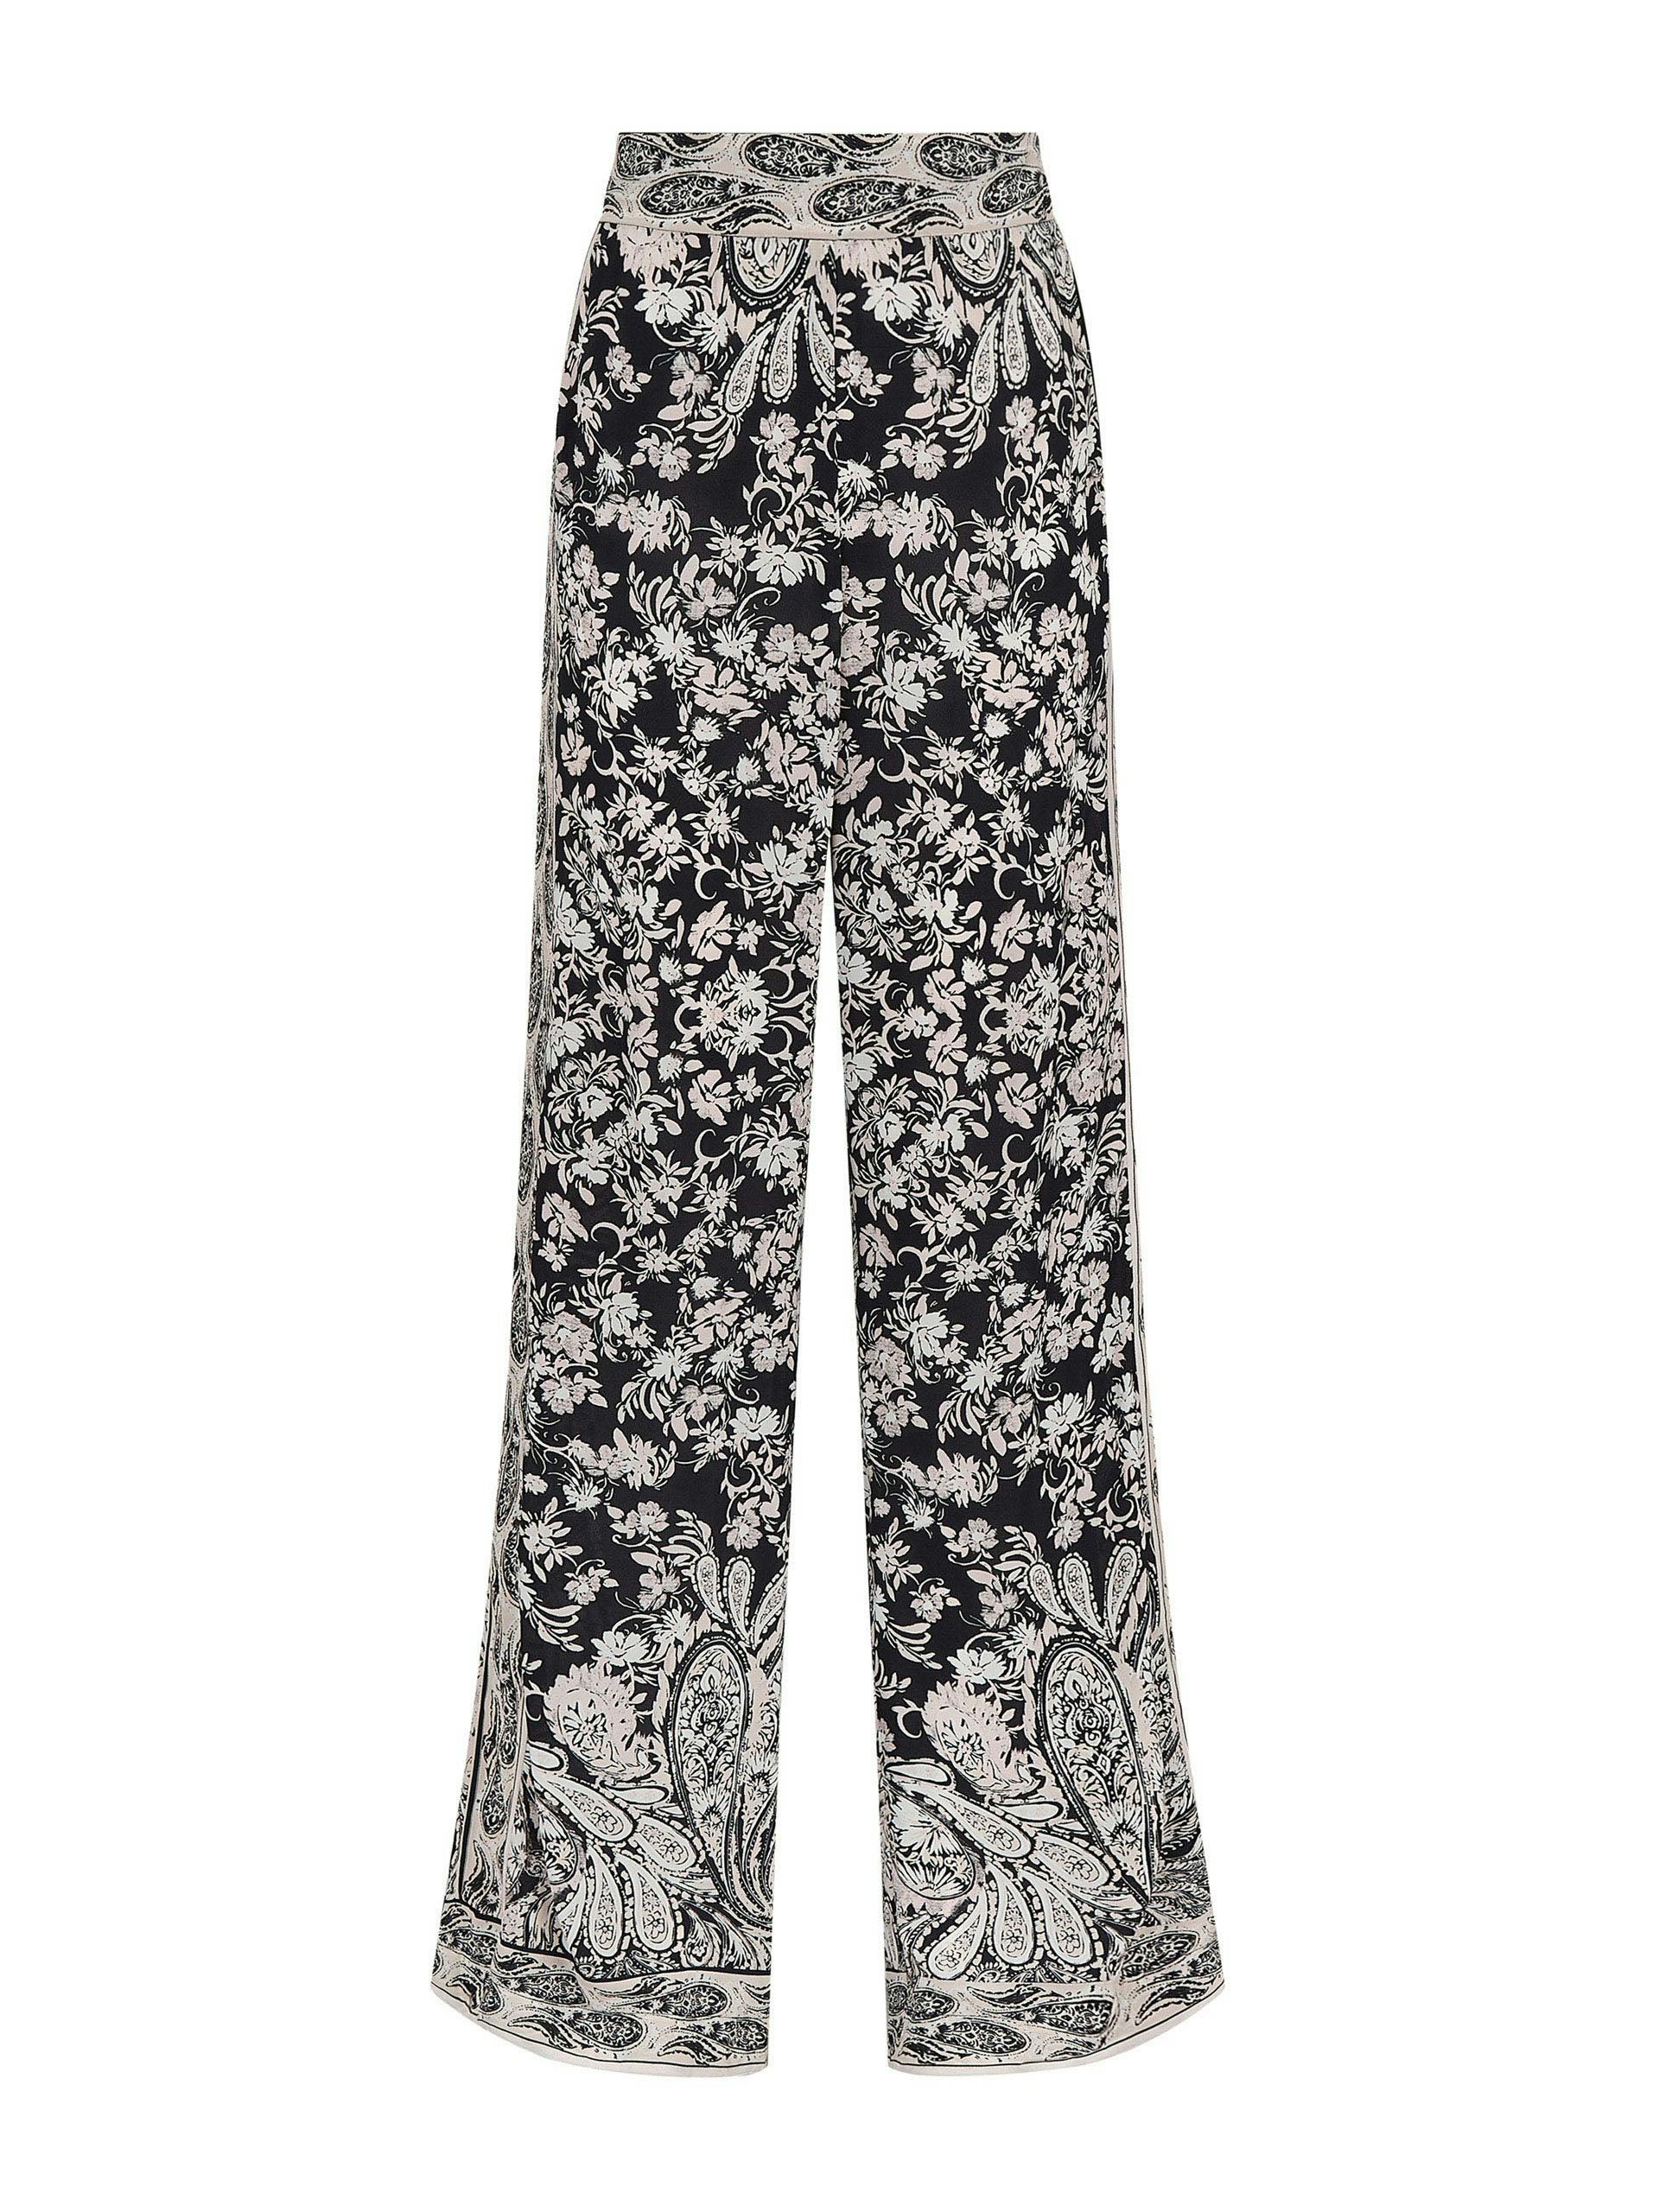 Black and white paisley Sandy trousers